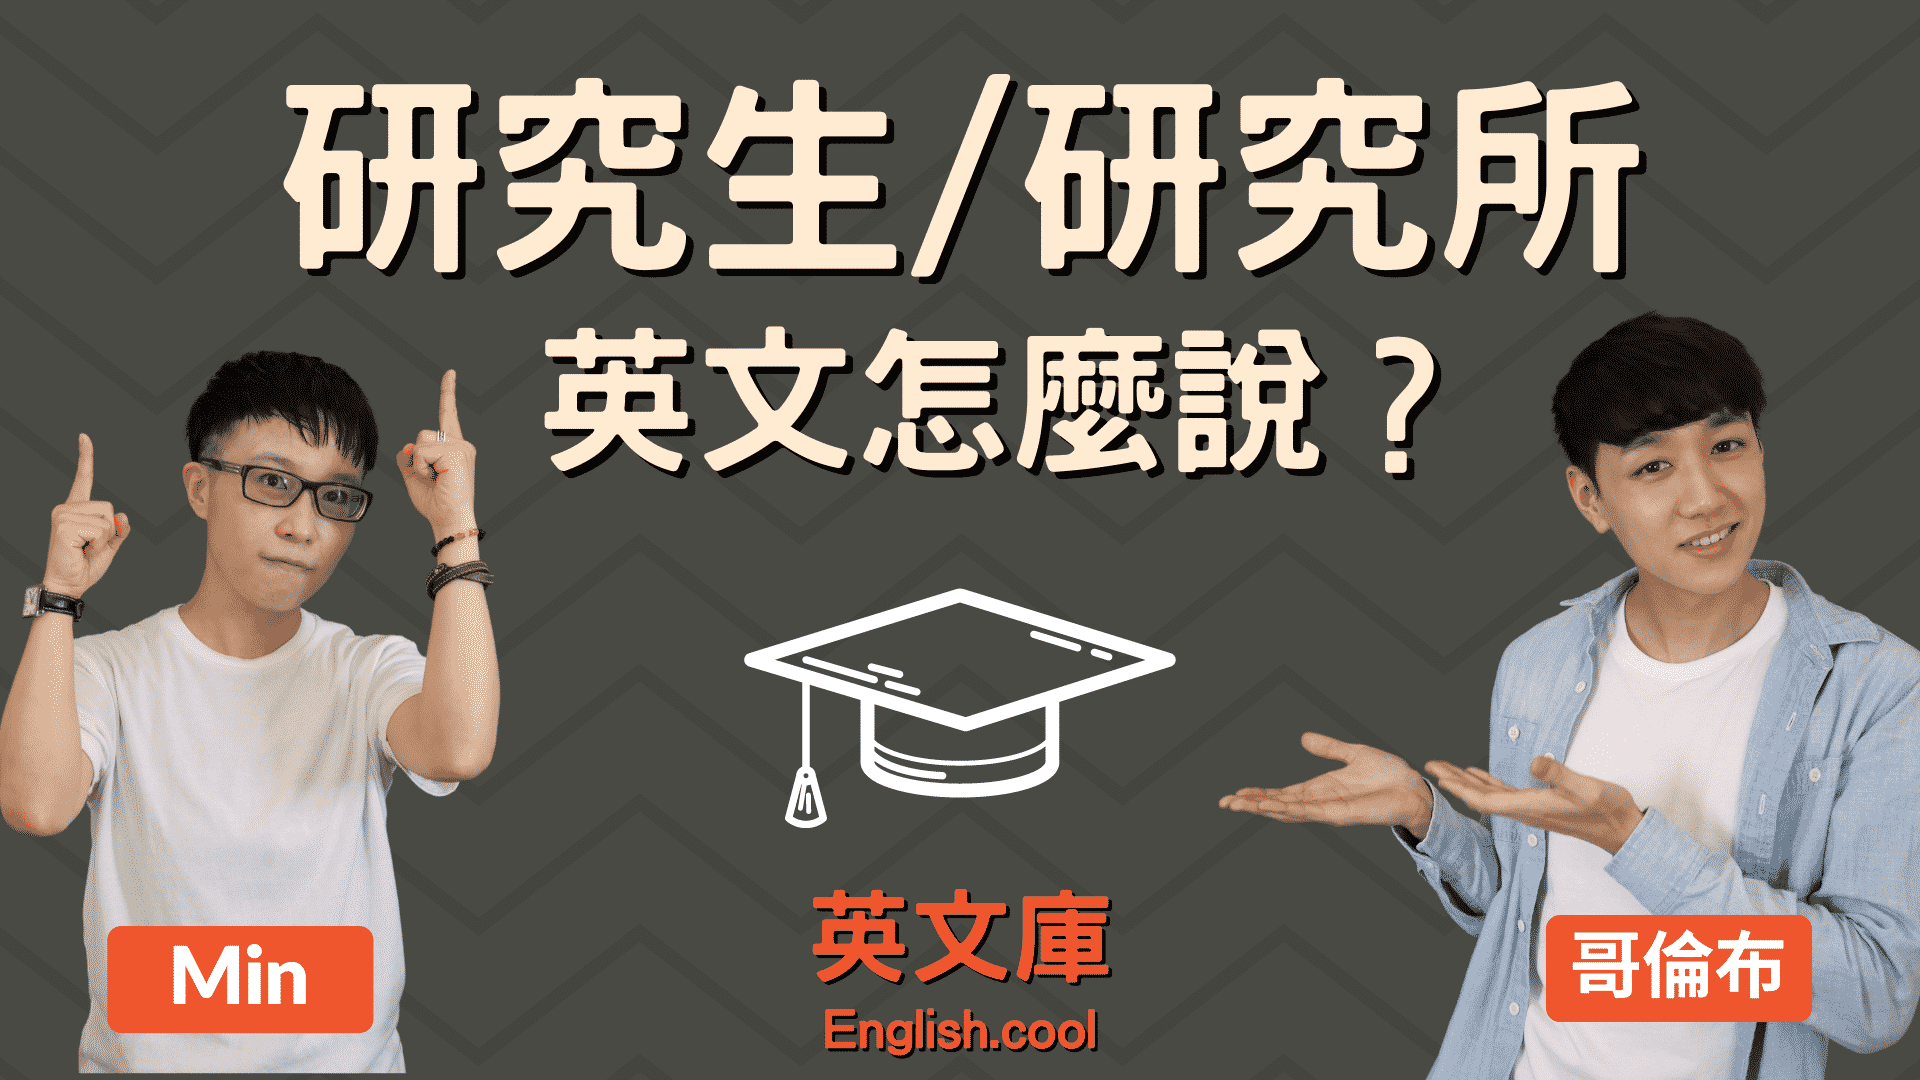 You are currently viewing 「研究生、研究所」英文是？graduate? postgraduate? master?